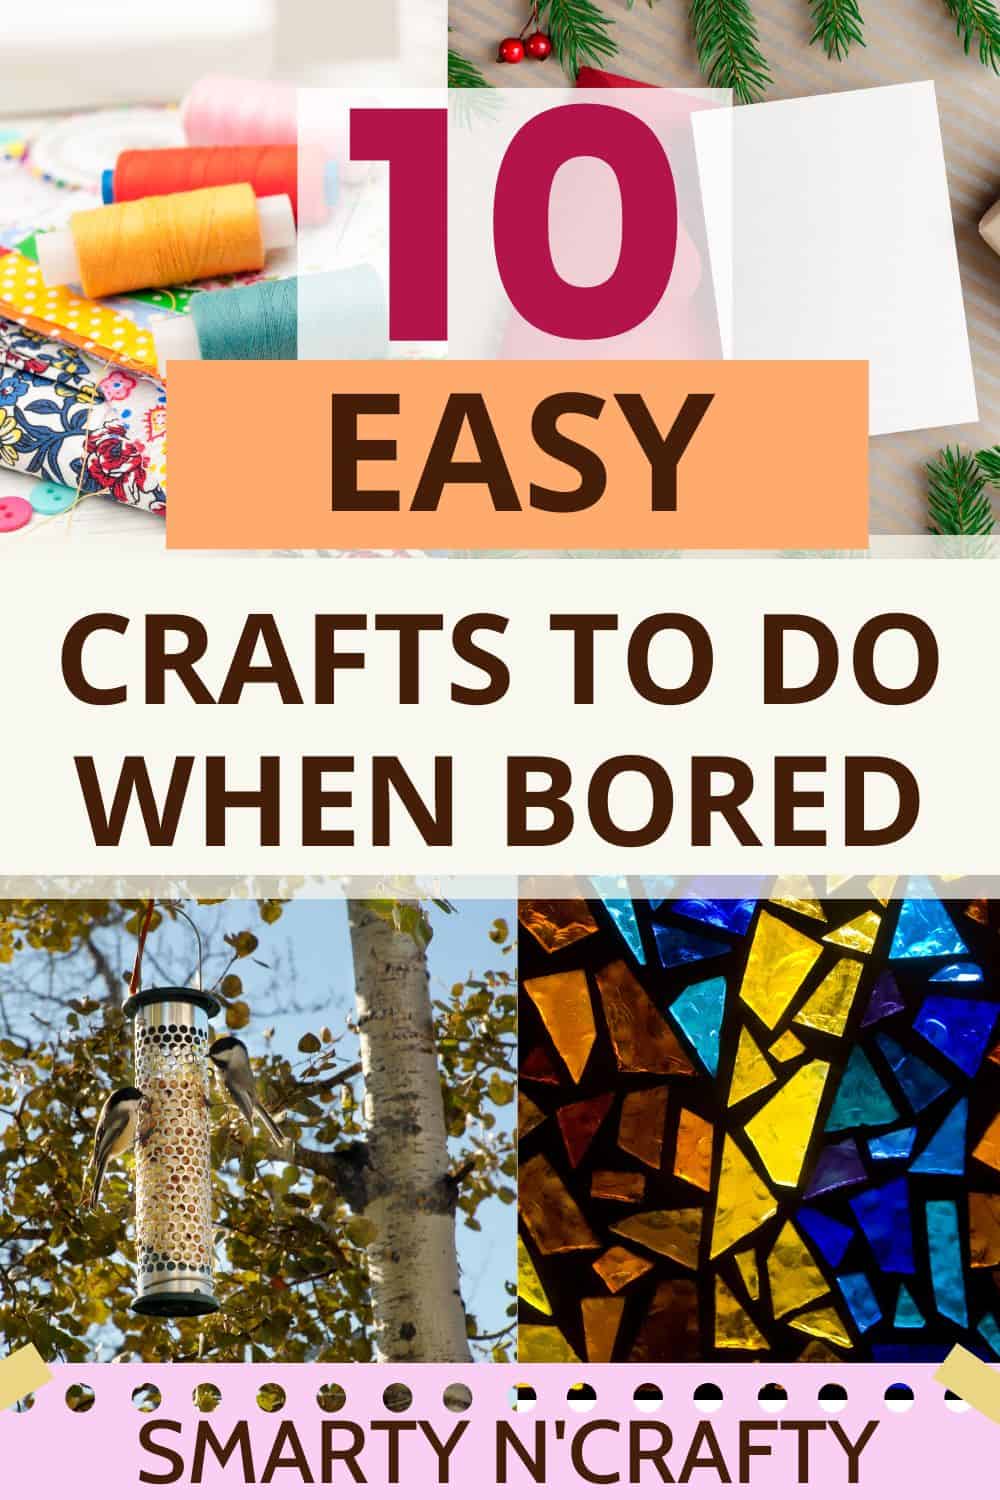 CRAFTS TO DO WHEN BORED (11)